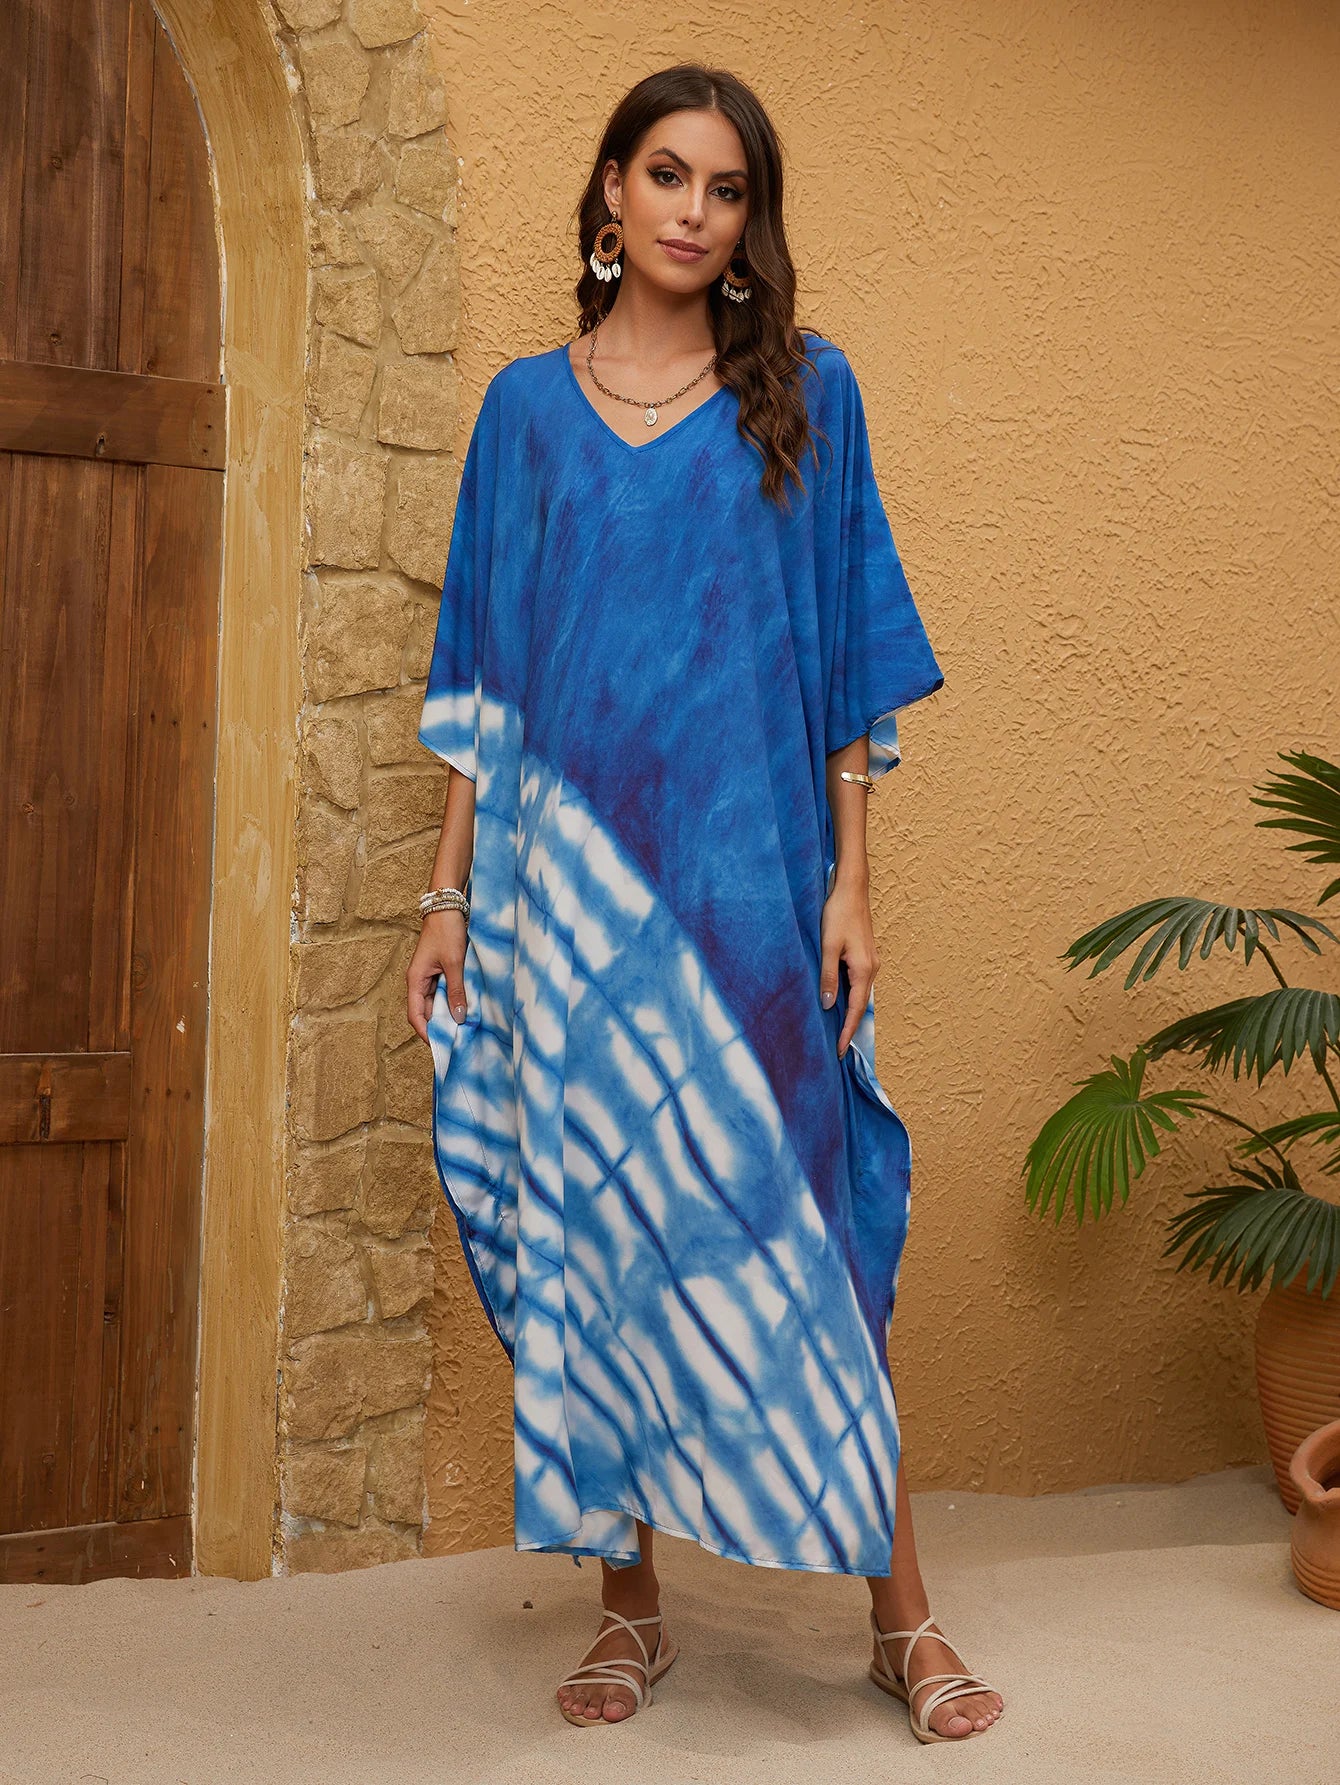 Women's Boho Style Cover Up